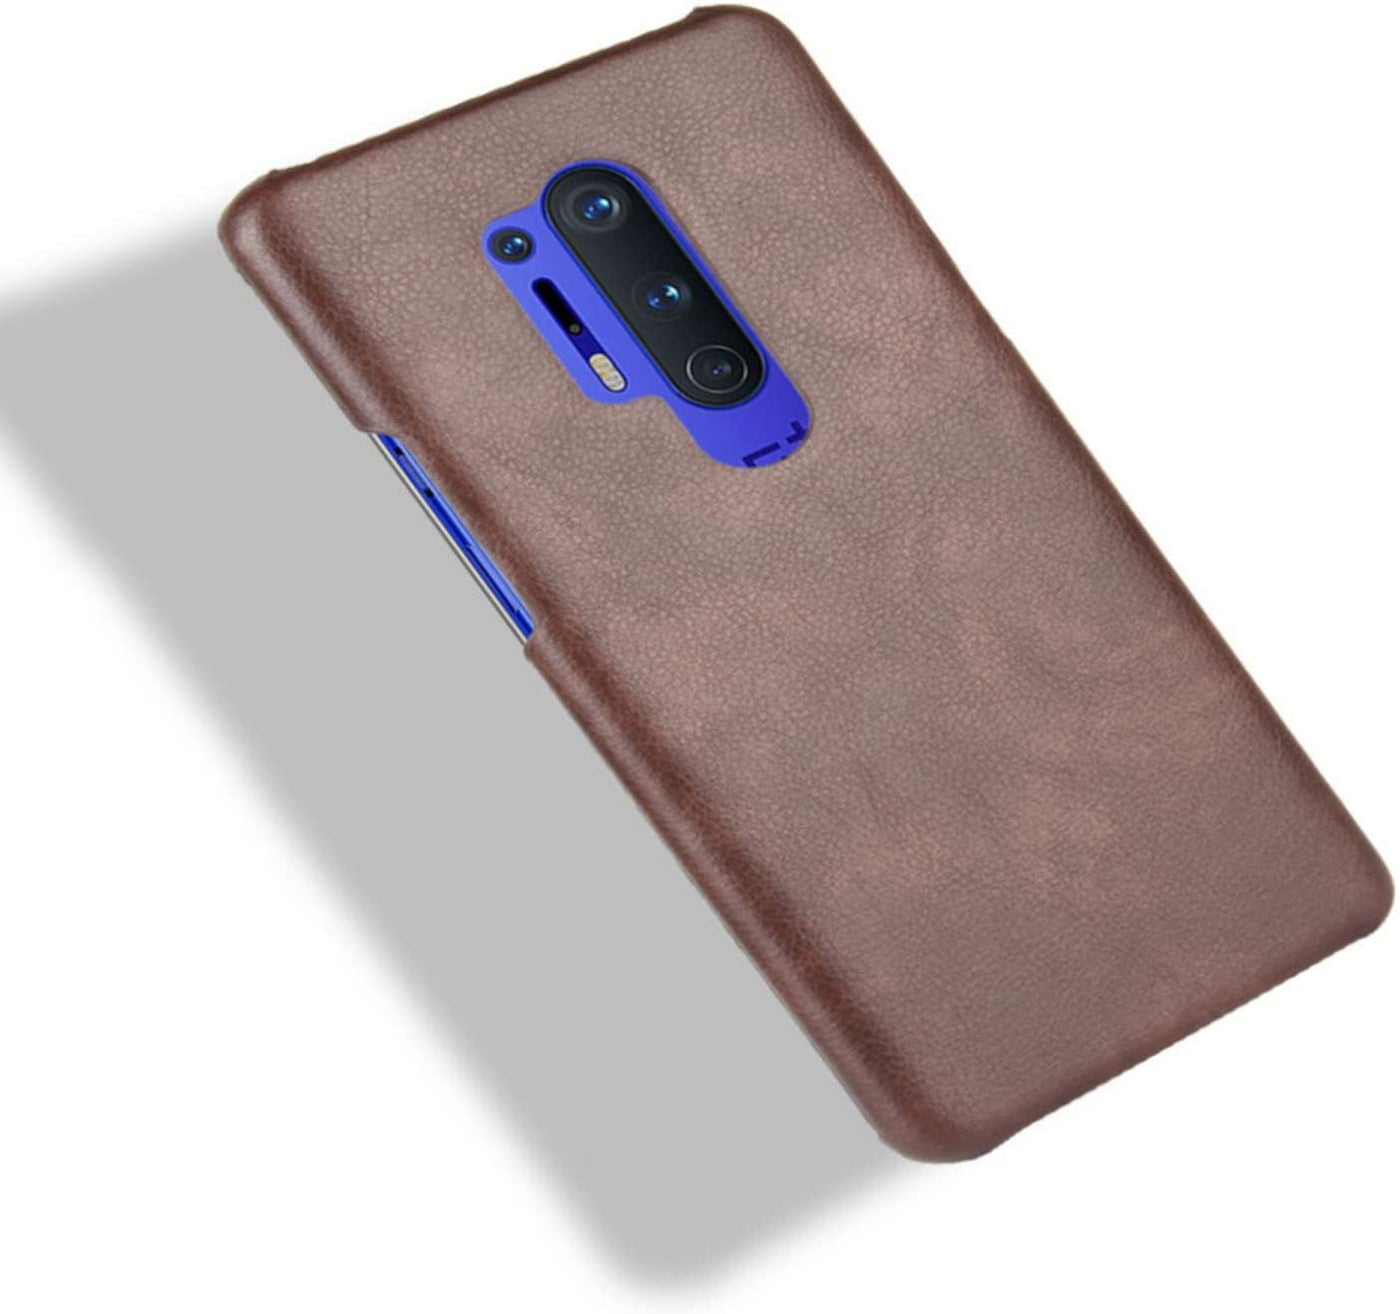 Oneplus 8 Pro coffee color leather back cover case